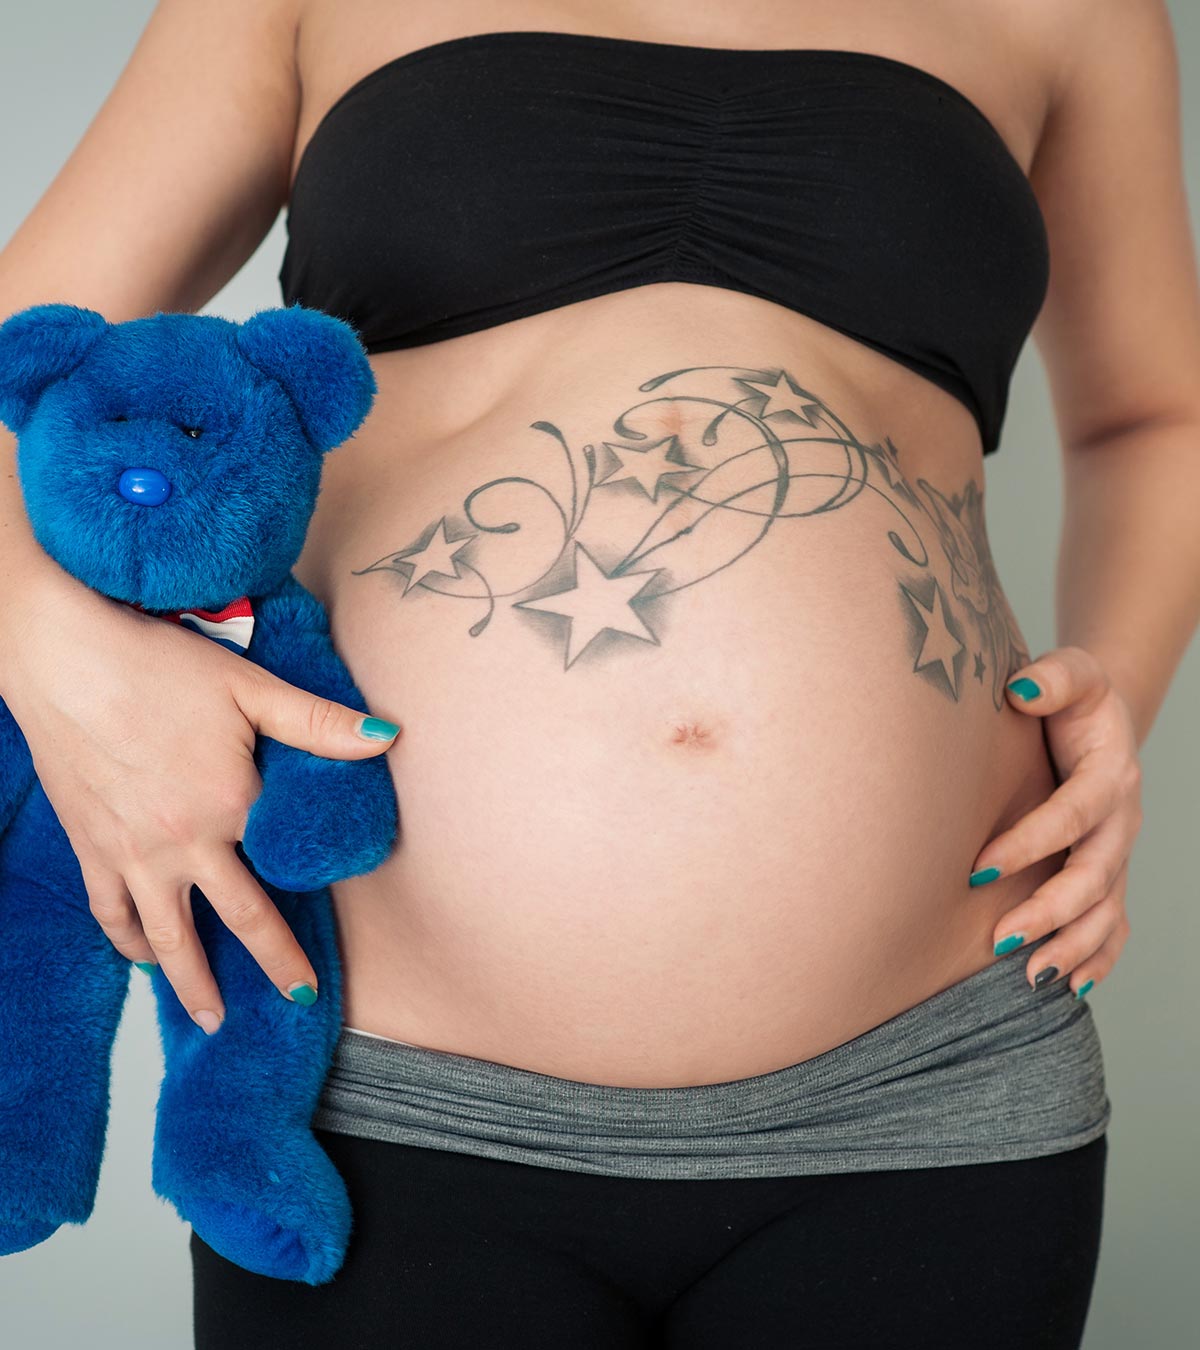 Can You Get A Tattoo When Pregnant? Risks And Precautions